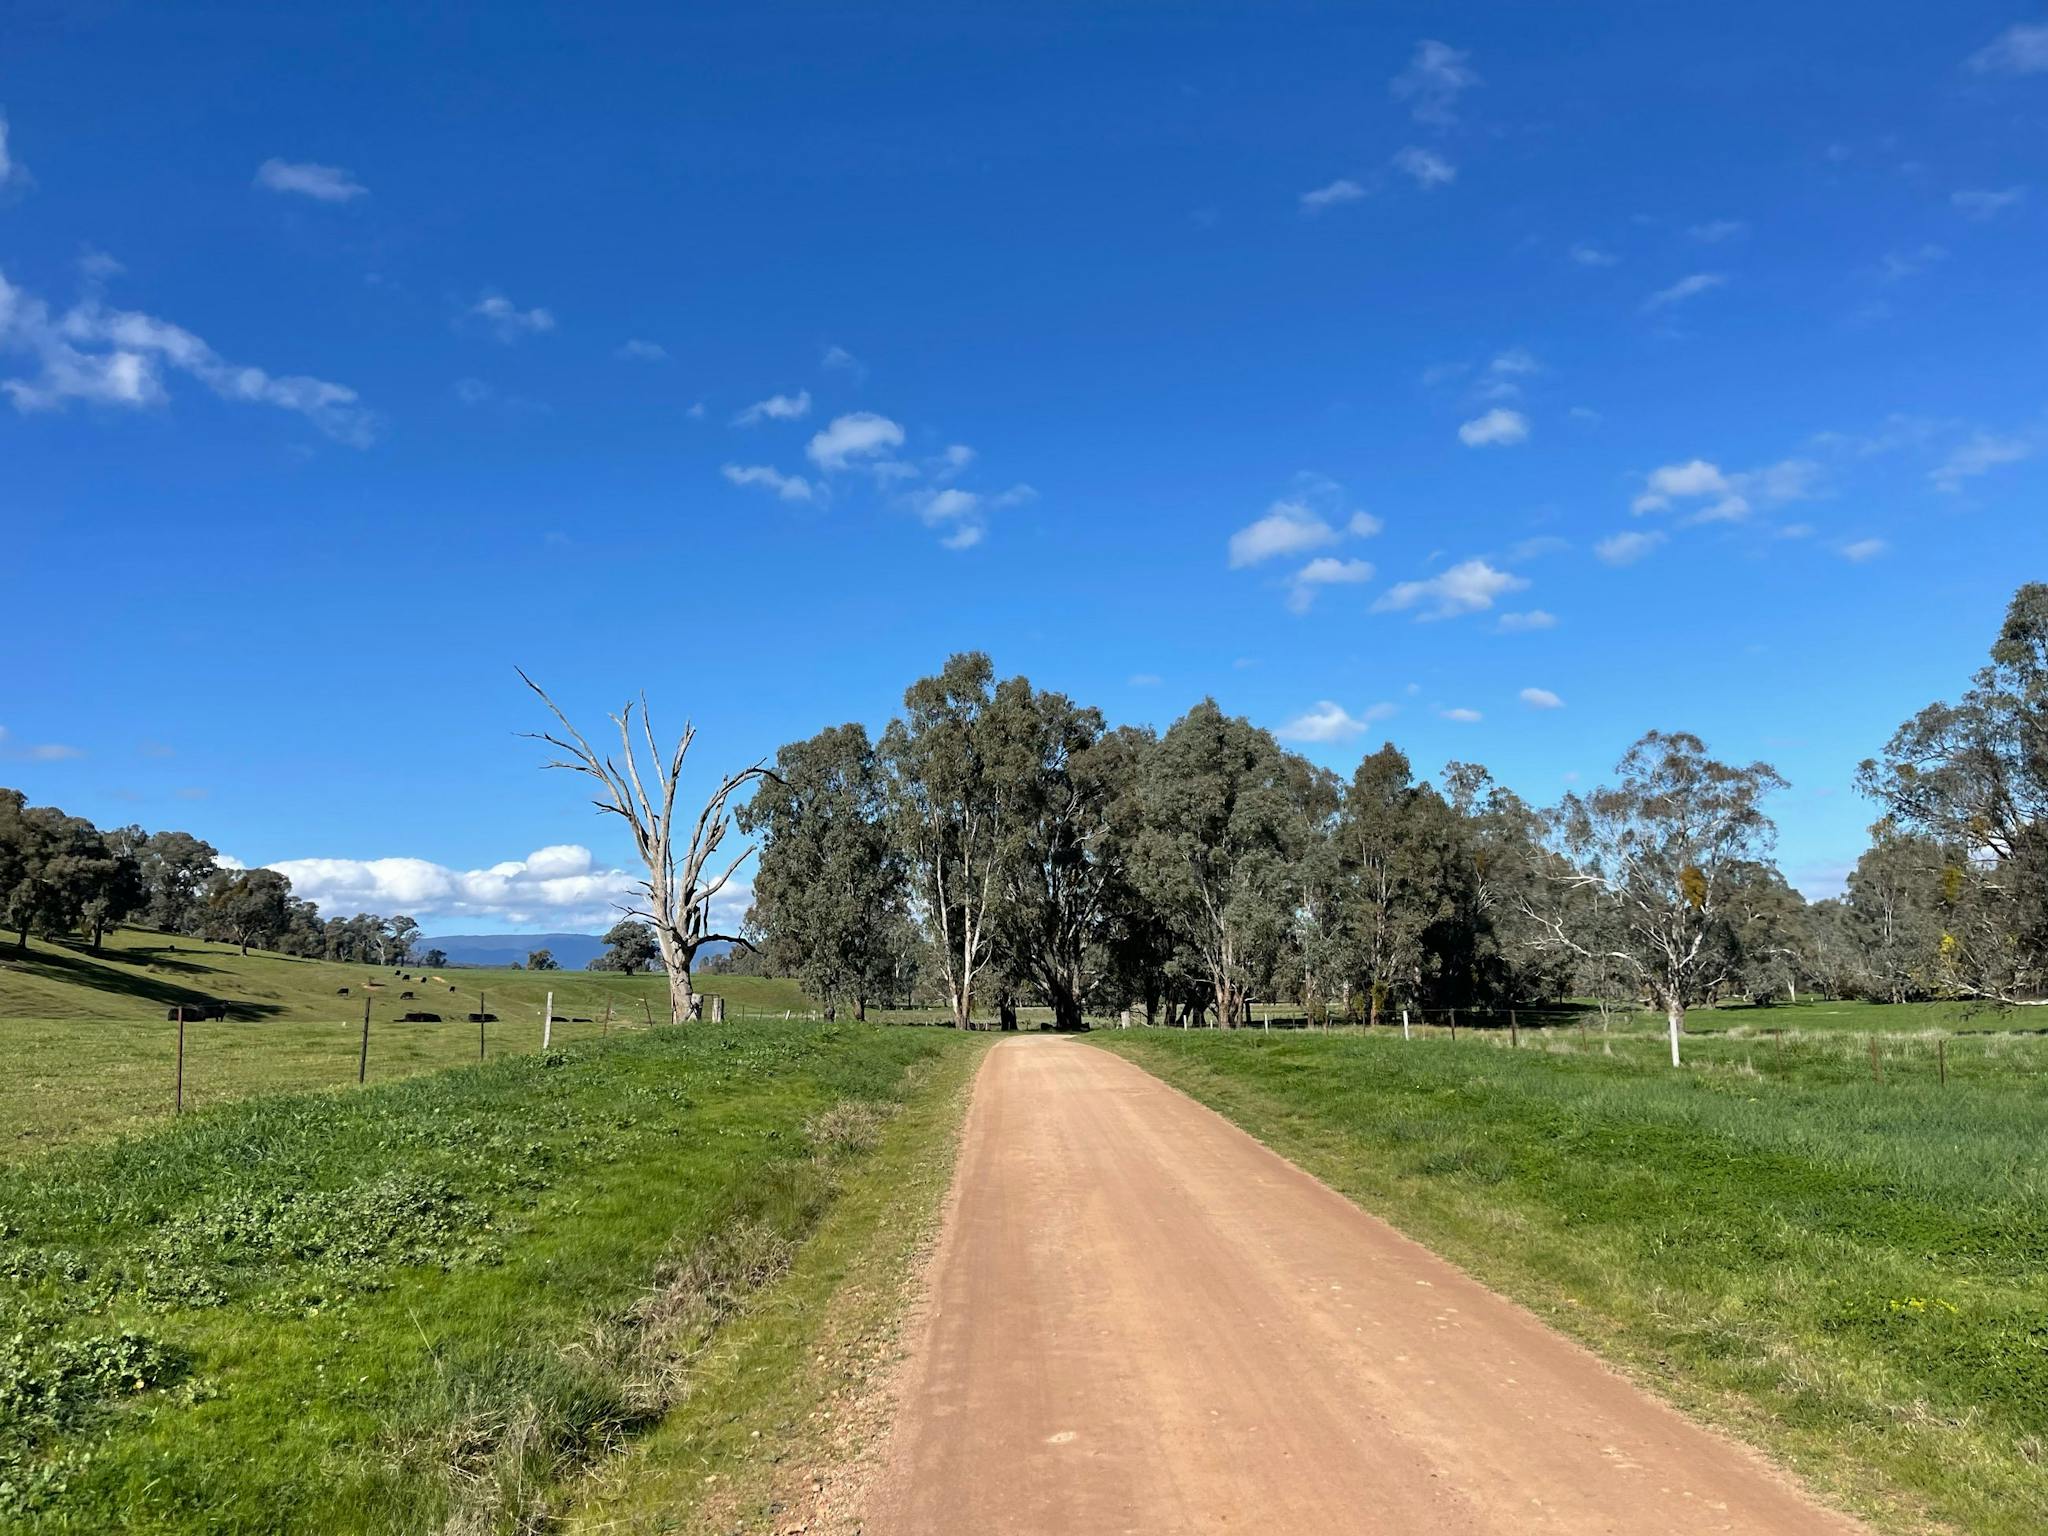 Light brown gravel road, green grass, paddocks, gum trees in distance blue sky with wispy clouds